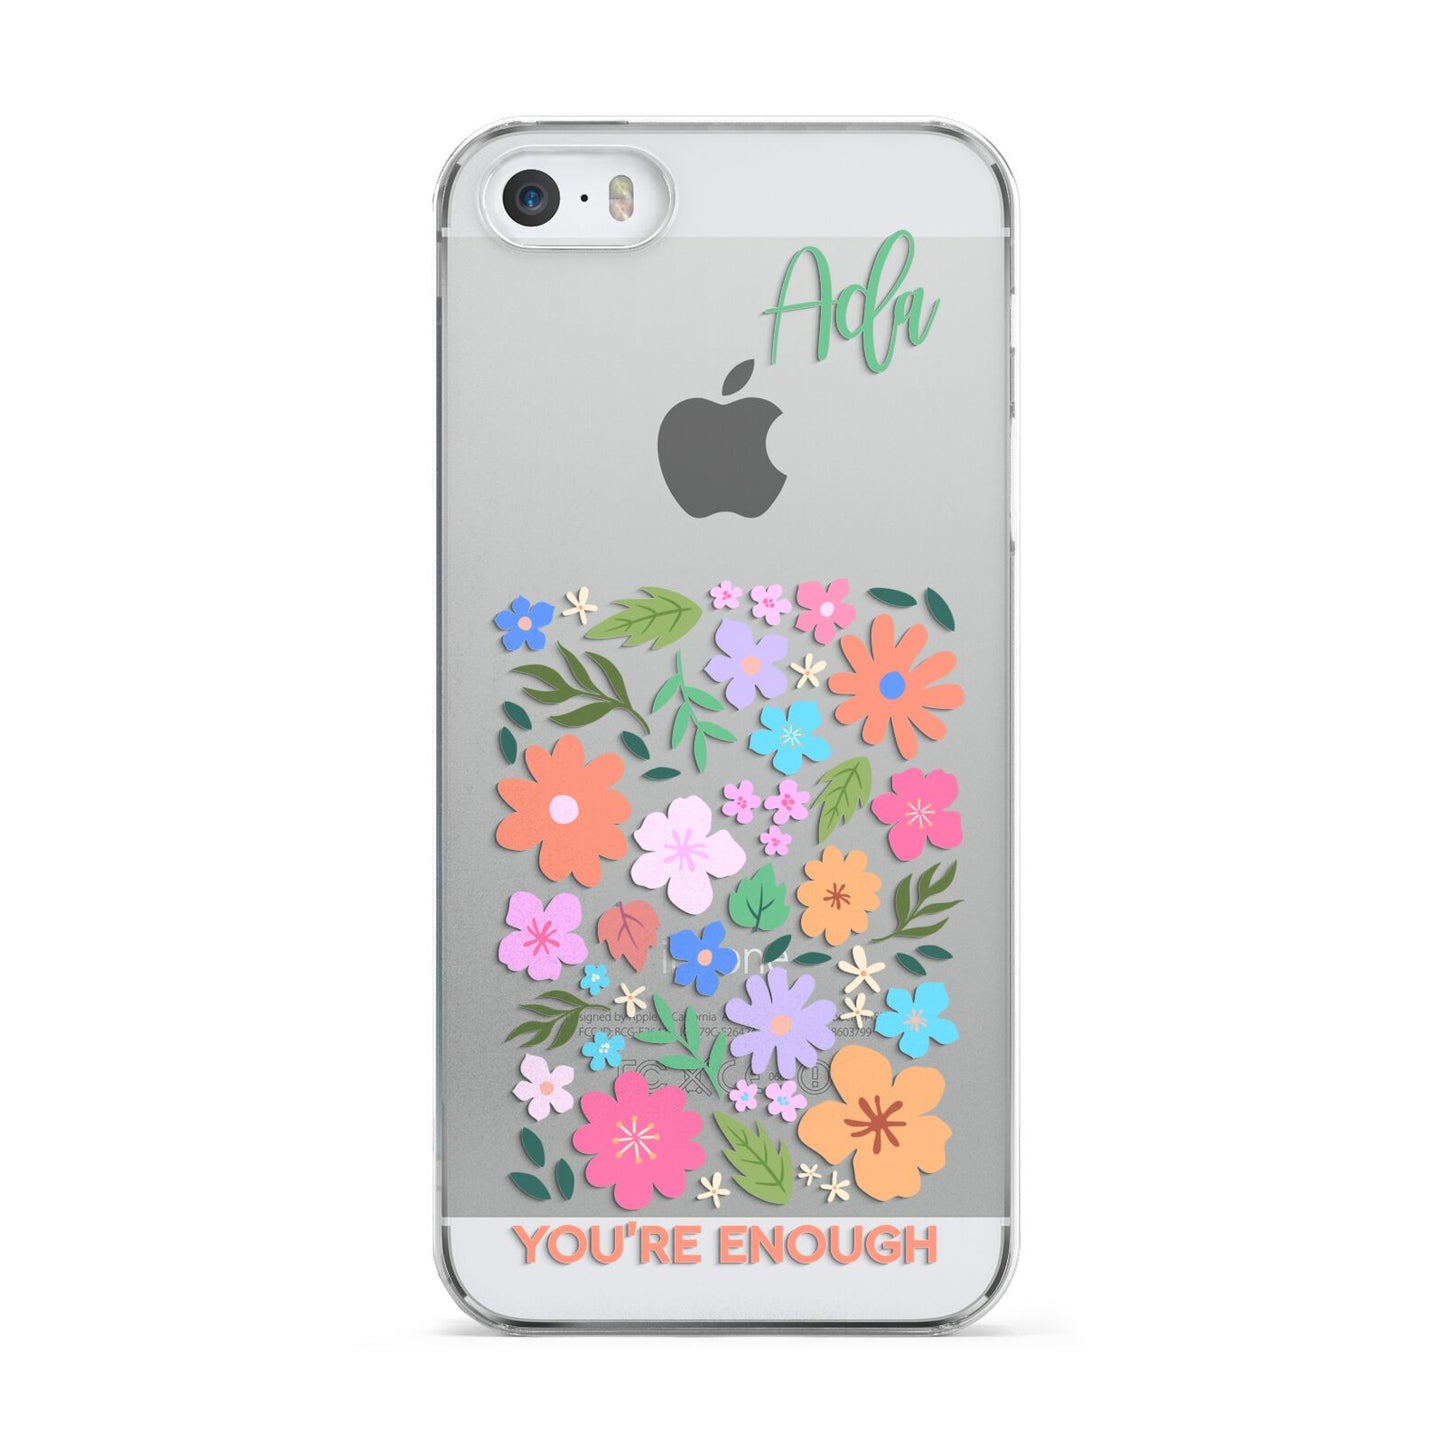 Floral Poster Apple iPhone 5 Case